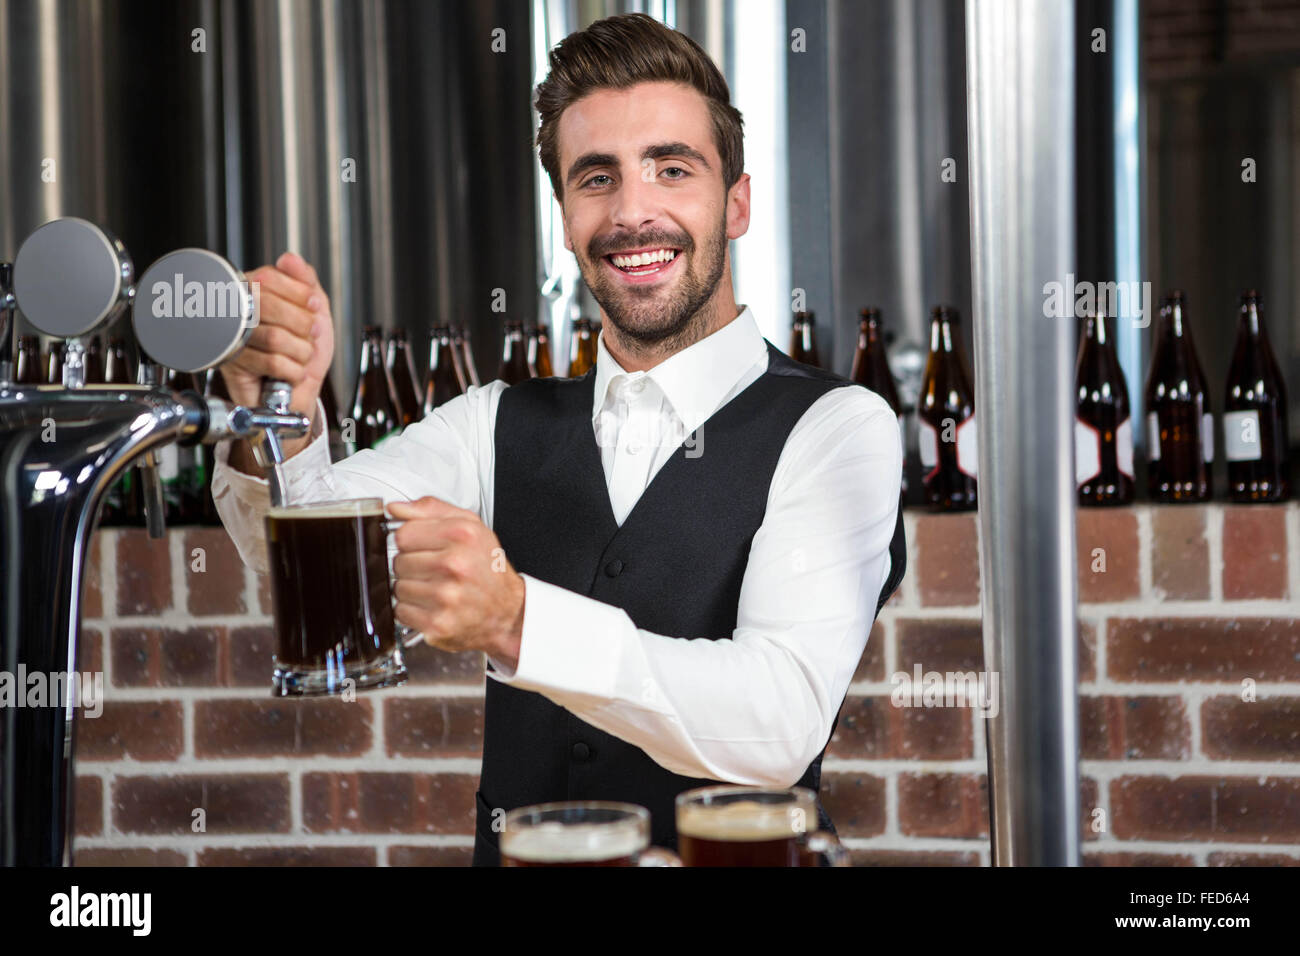 Barman pouring a pint of beer Stock Photo